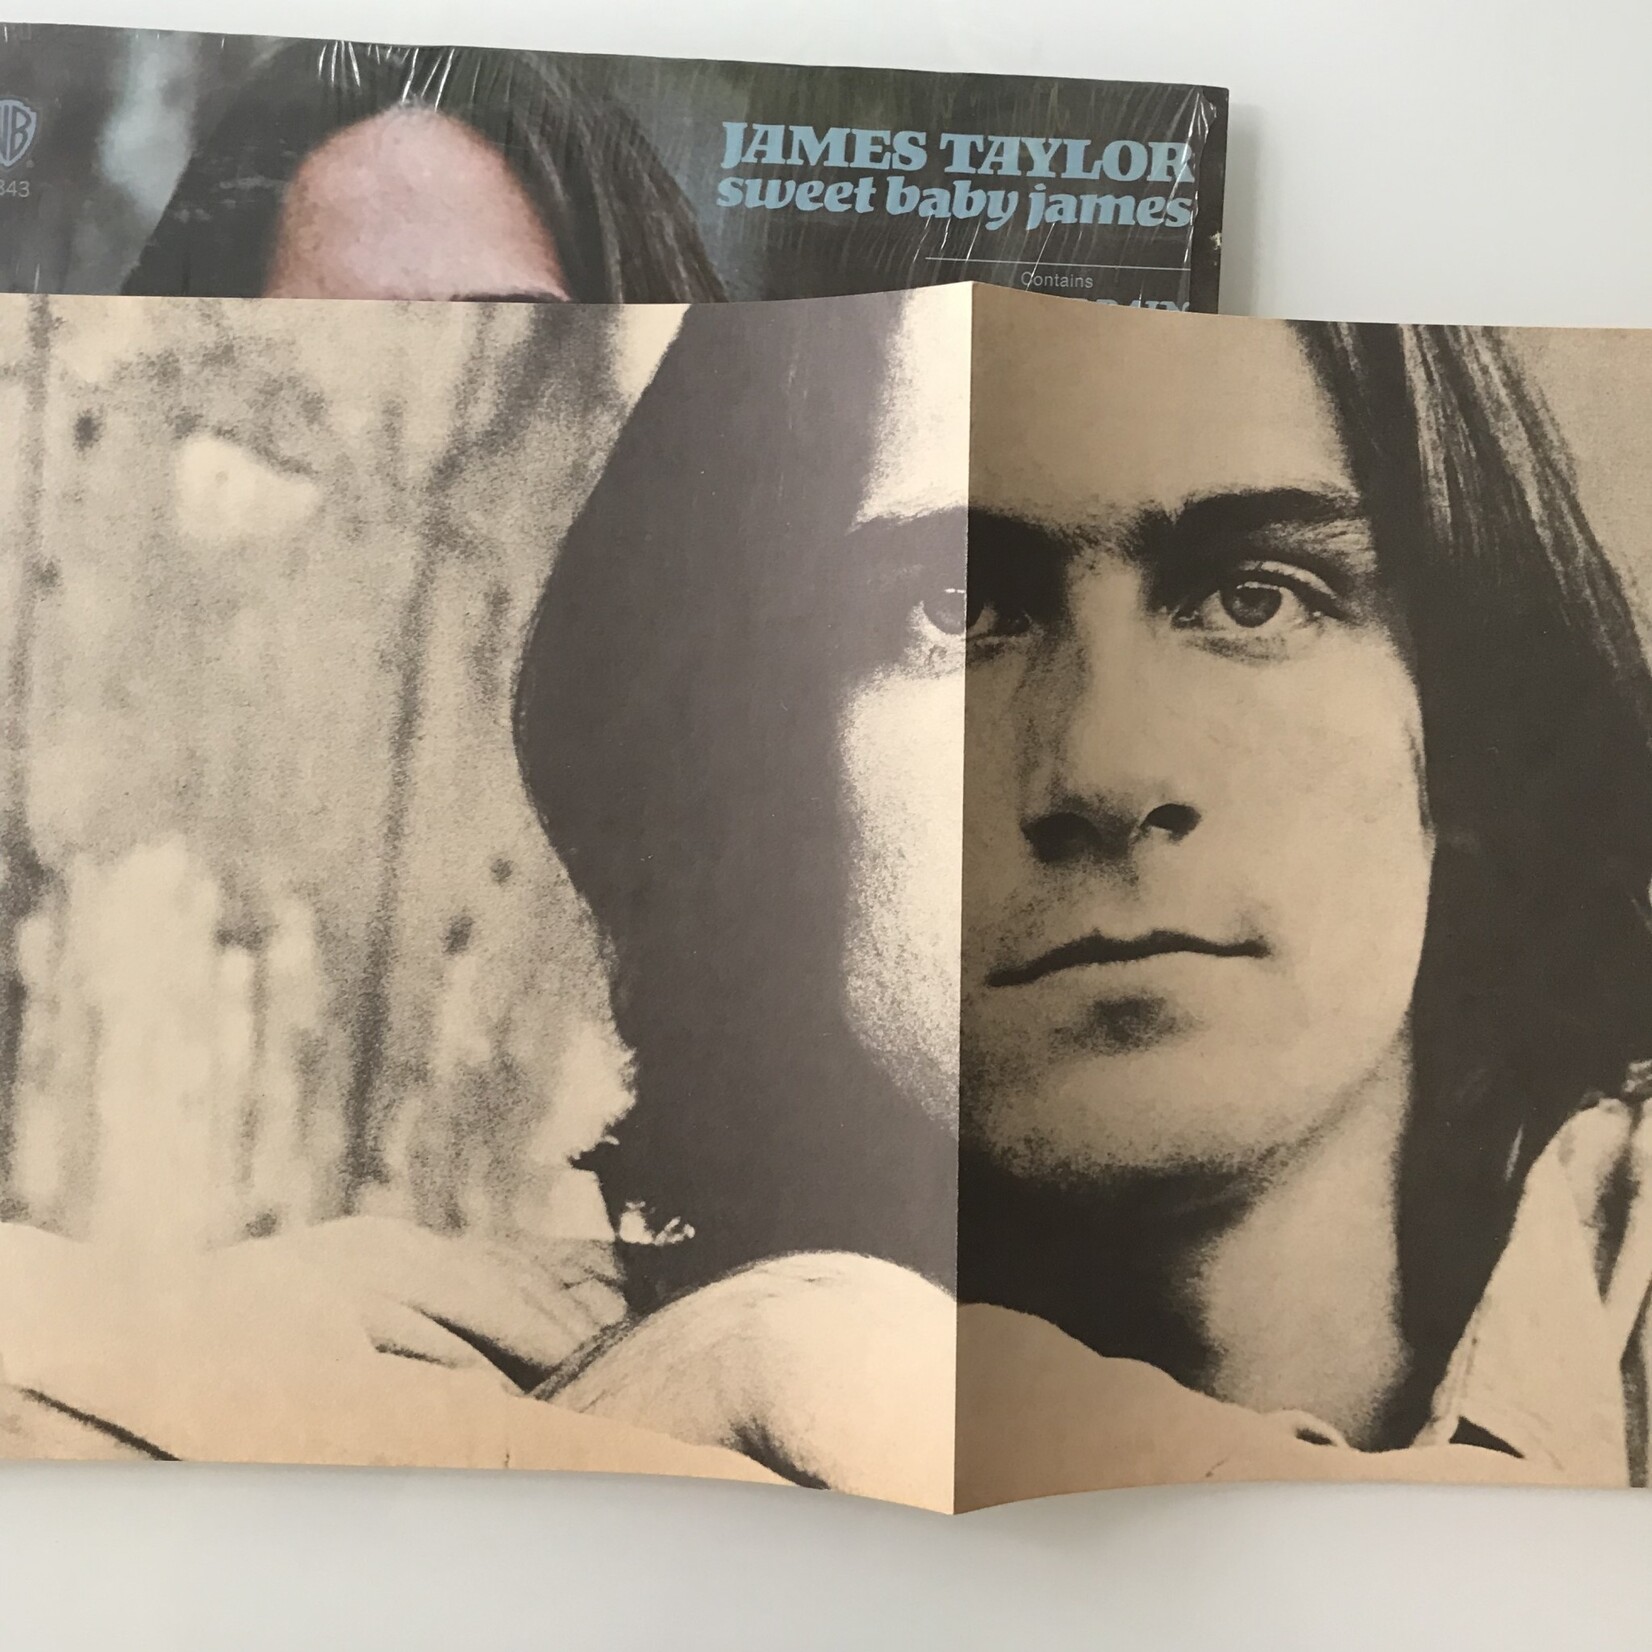 James Taylor - Sweet Baby James - 1843 - Vinyl LP with Poster (USED)